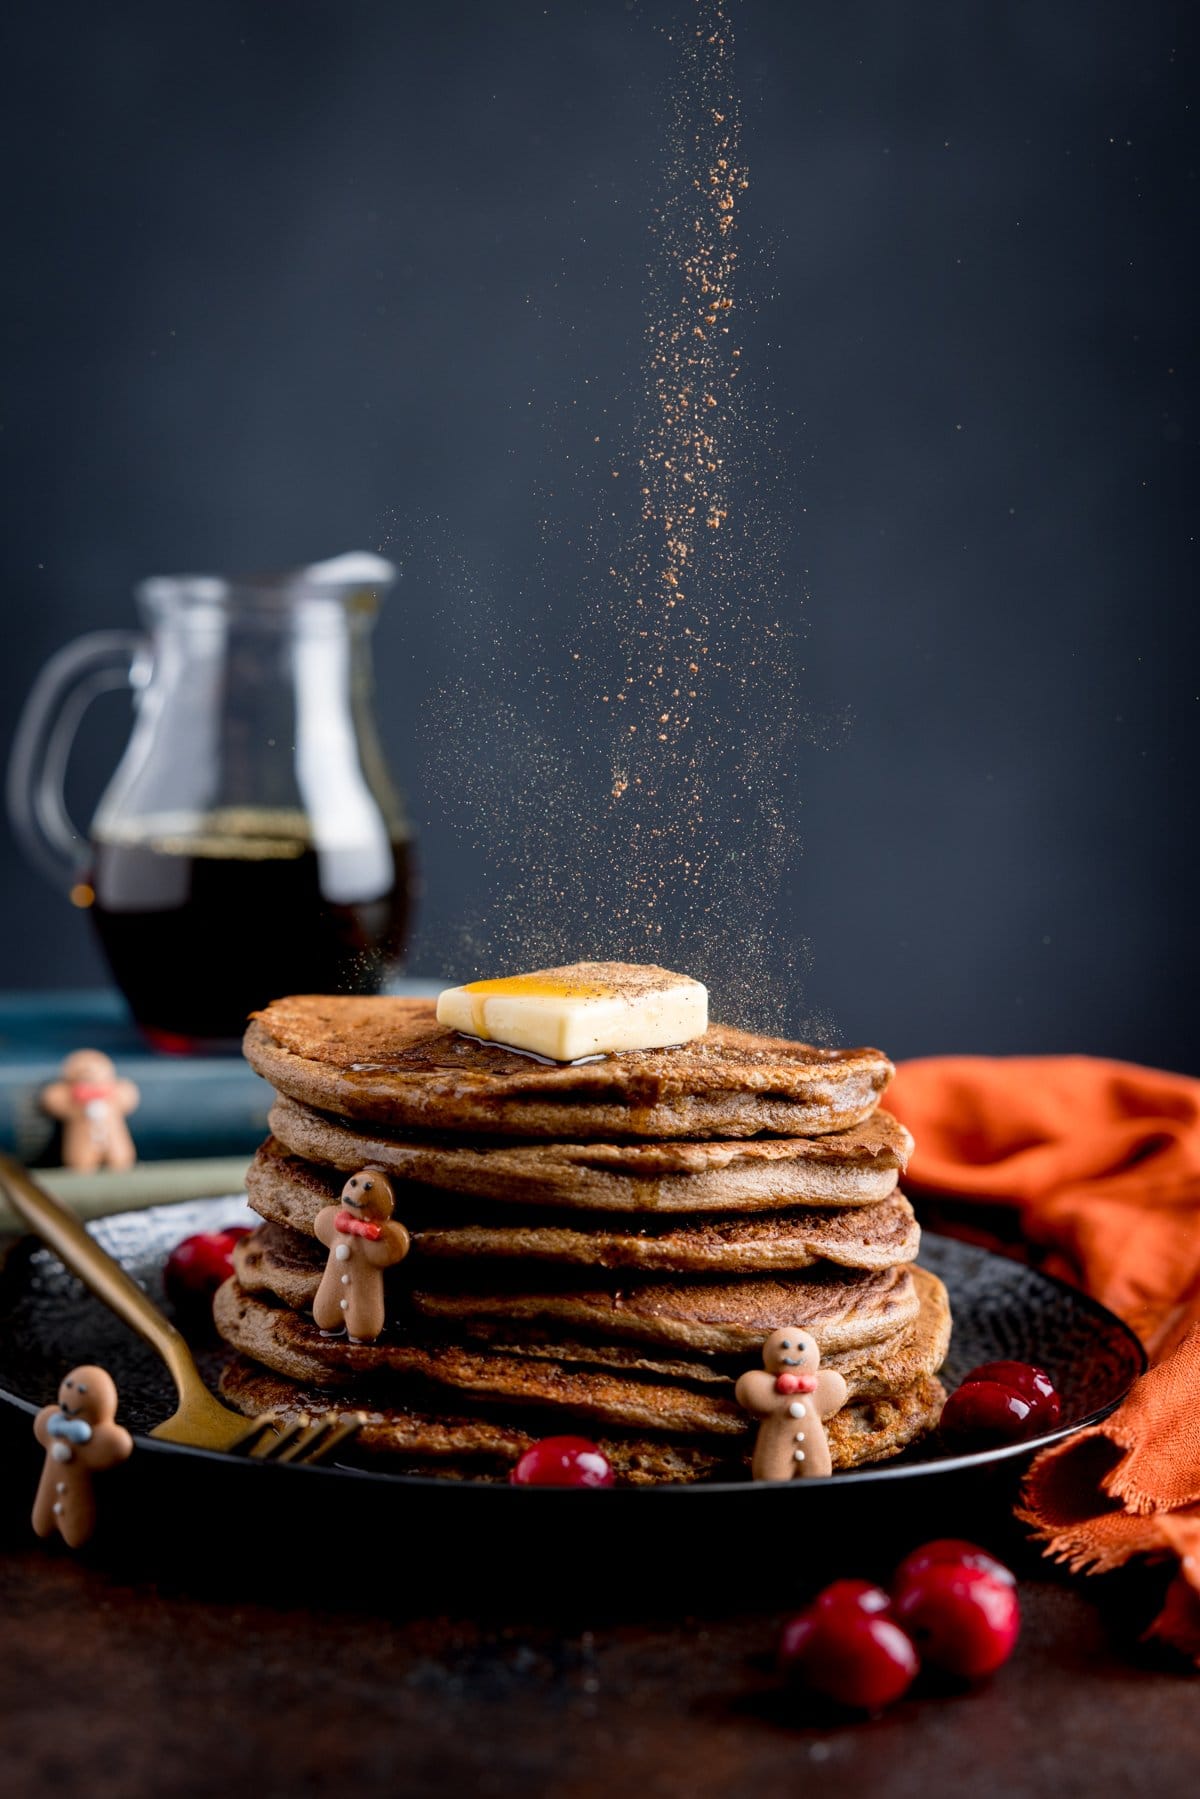 Edible glitter being sprinkled onto a stack of gingerbread pancakes with a jug of maple syrup in the background.